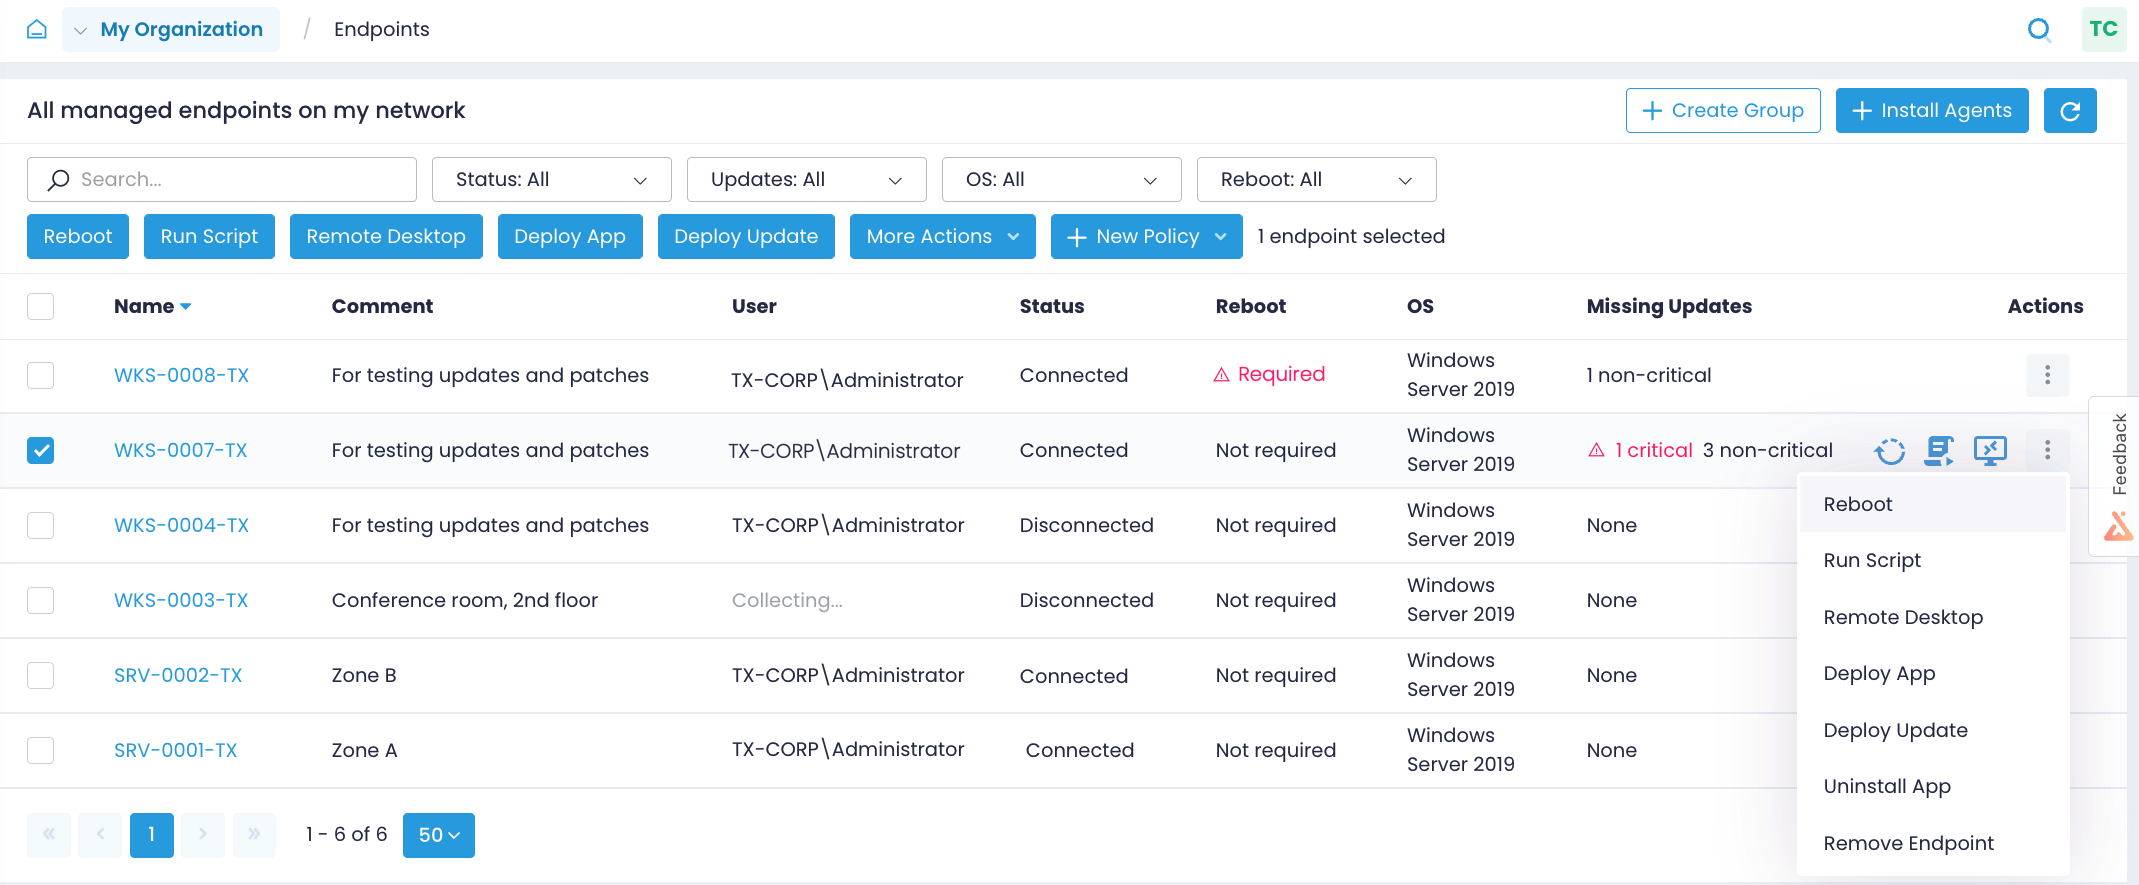 Endpoints dashboard provides access to quick management actions